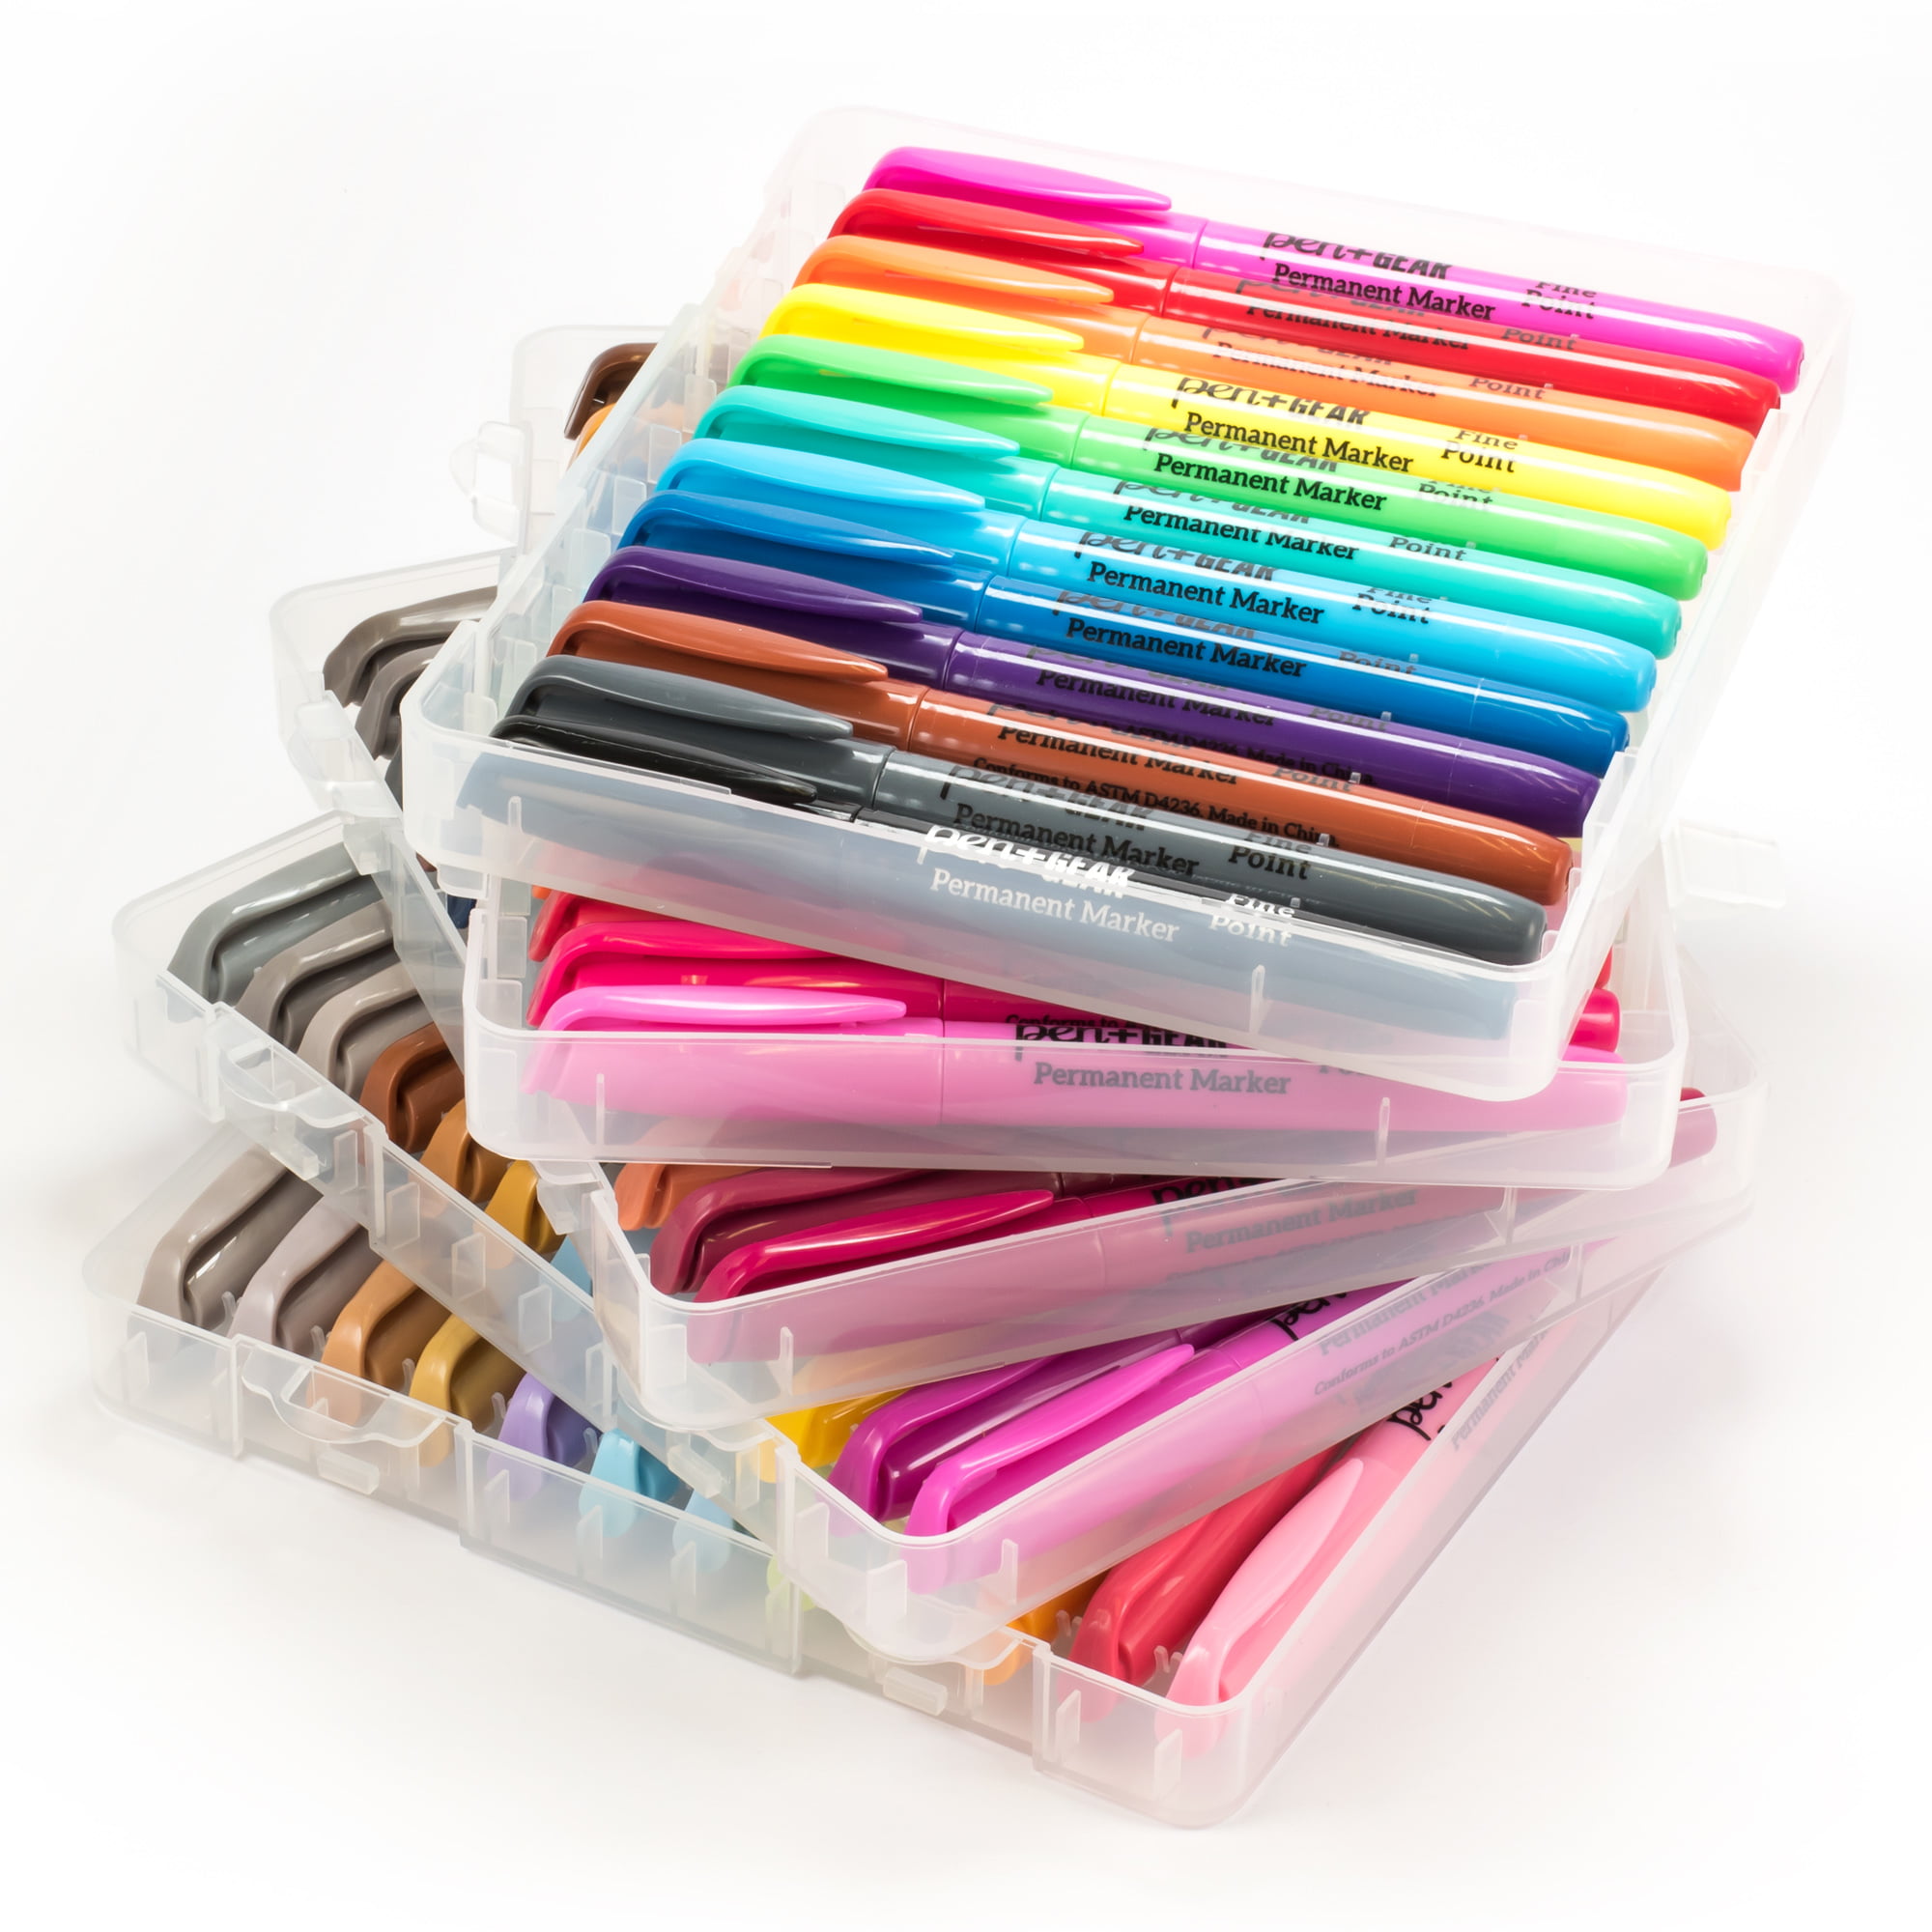 Sharpie Permanent Markers -Limited edition Box Of 60 includes mystery marker!